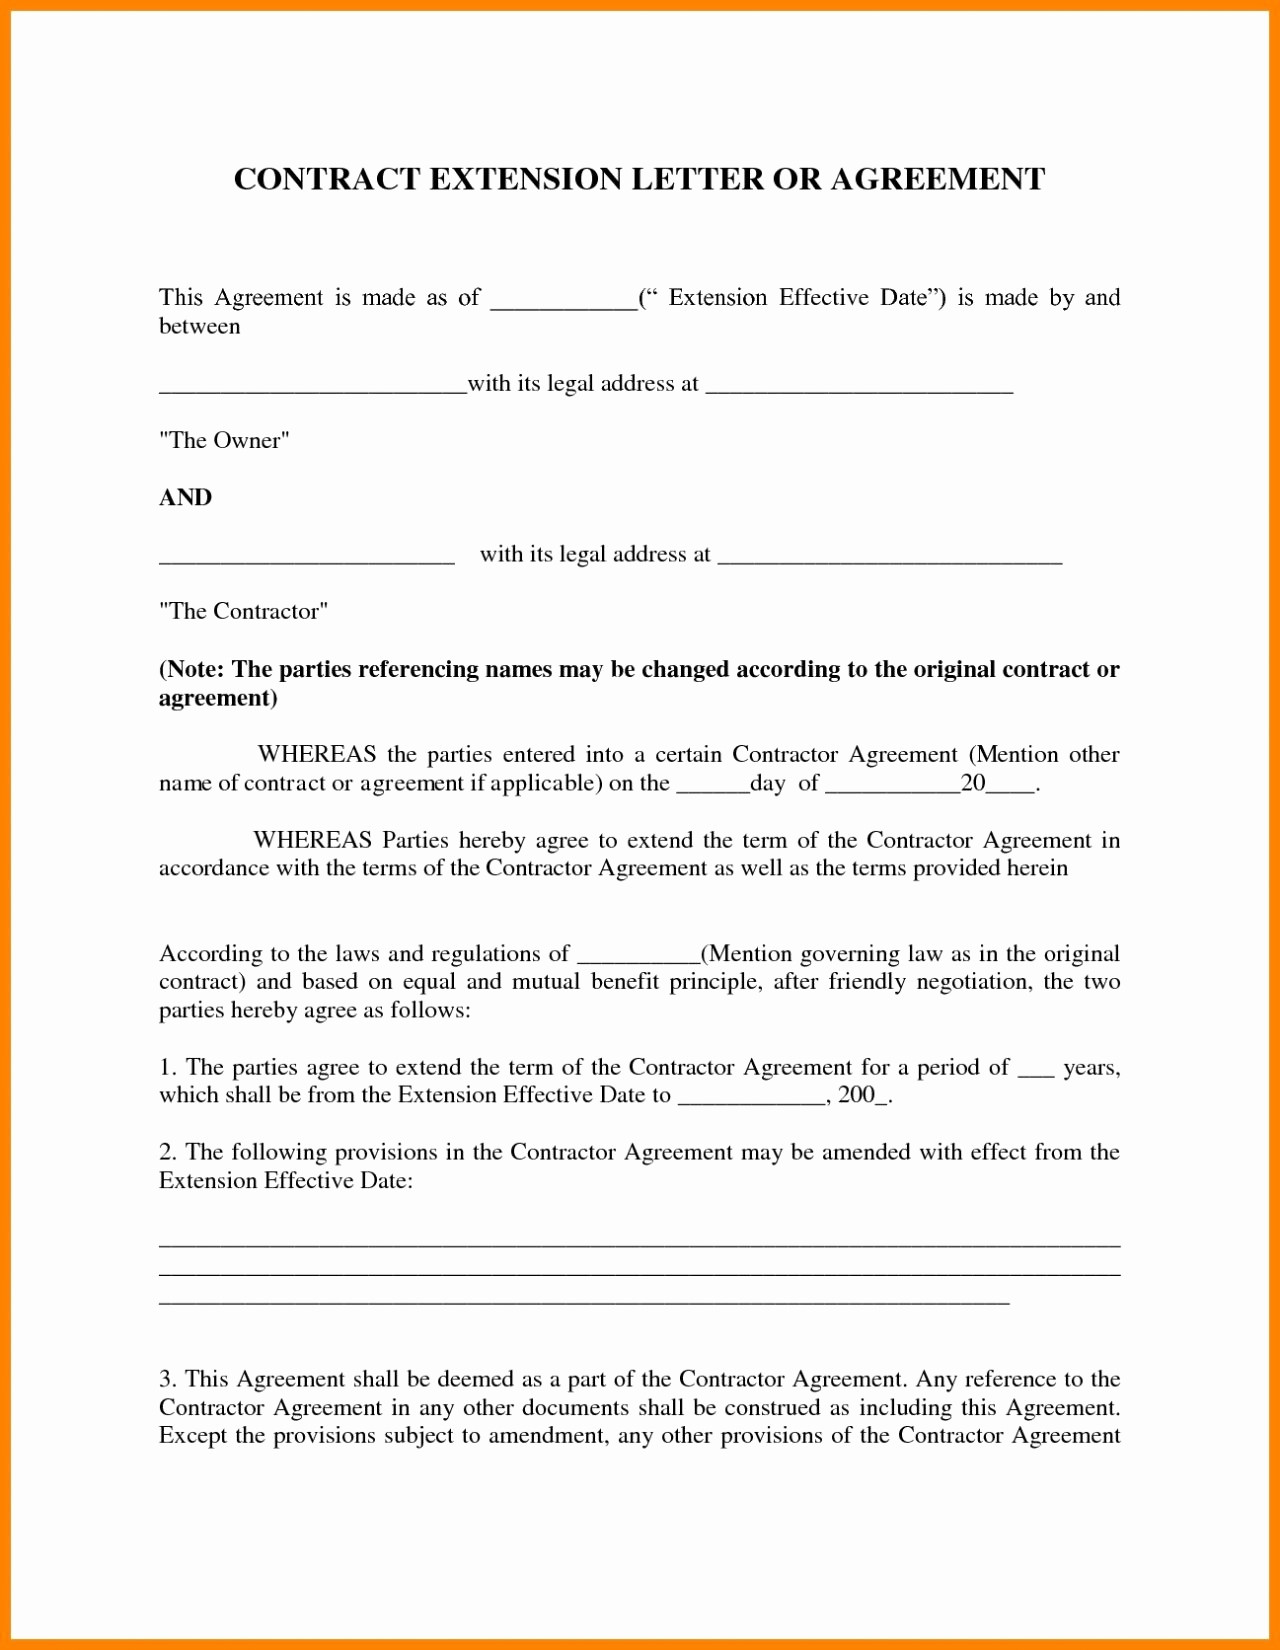 contract extension agreement letter example